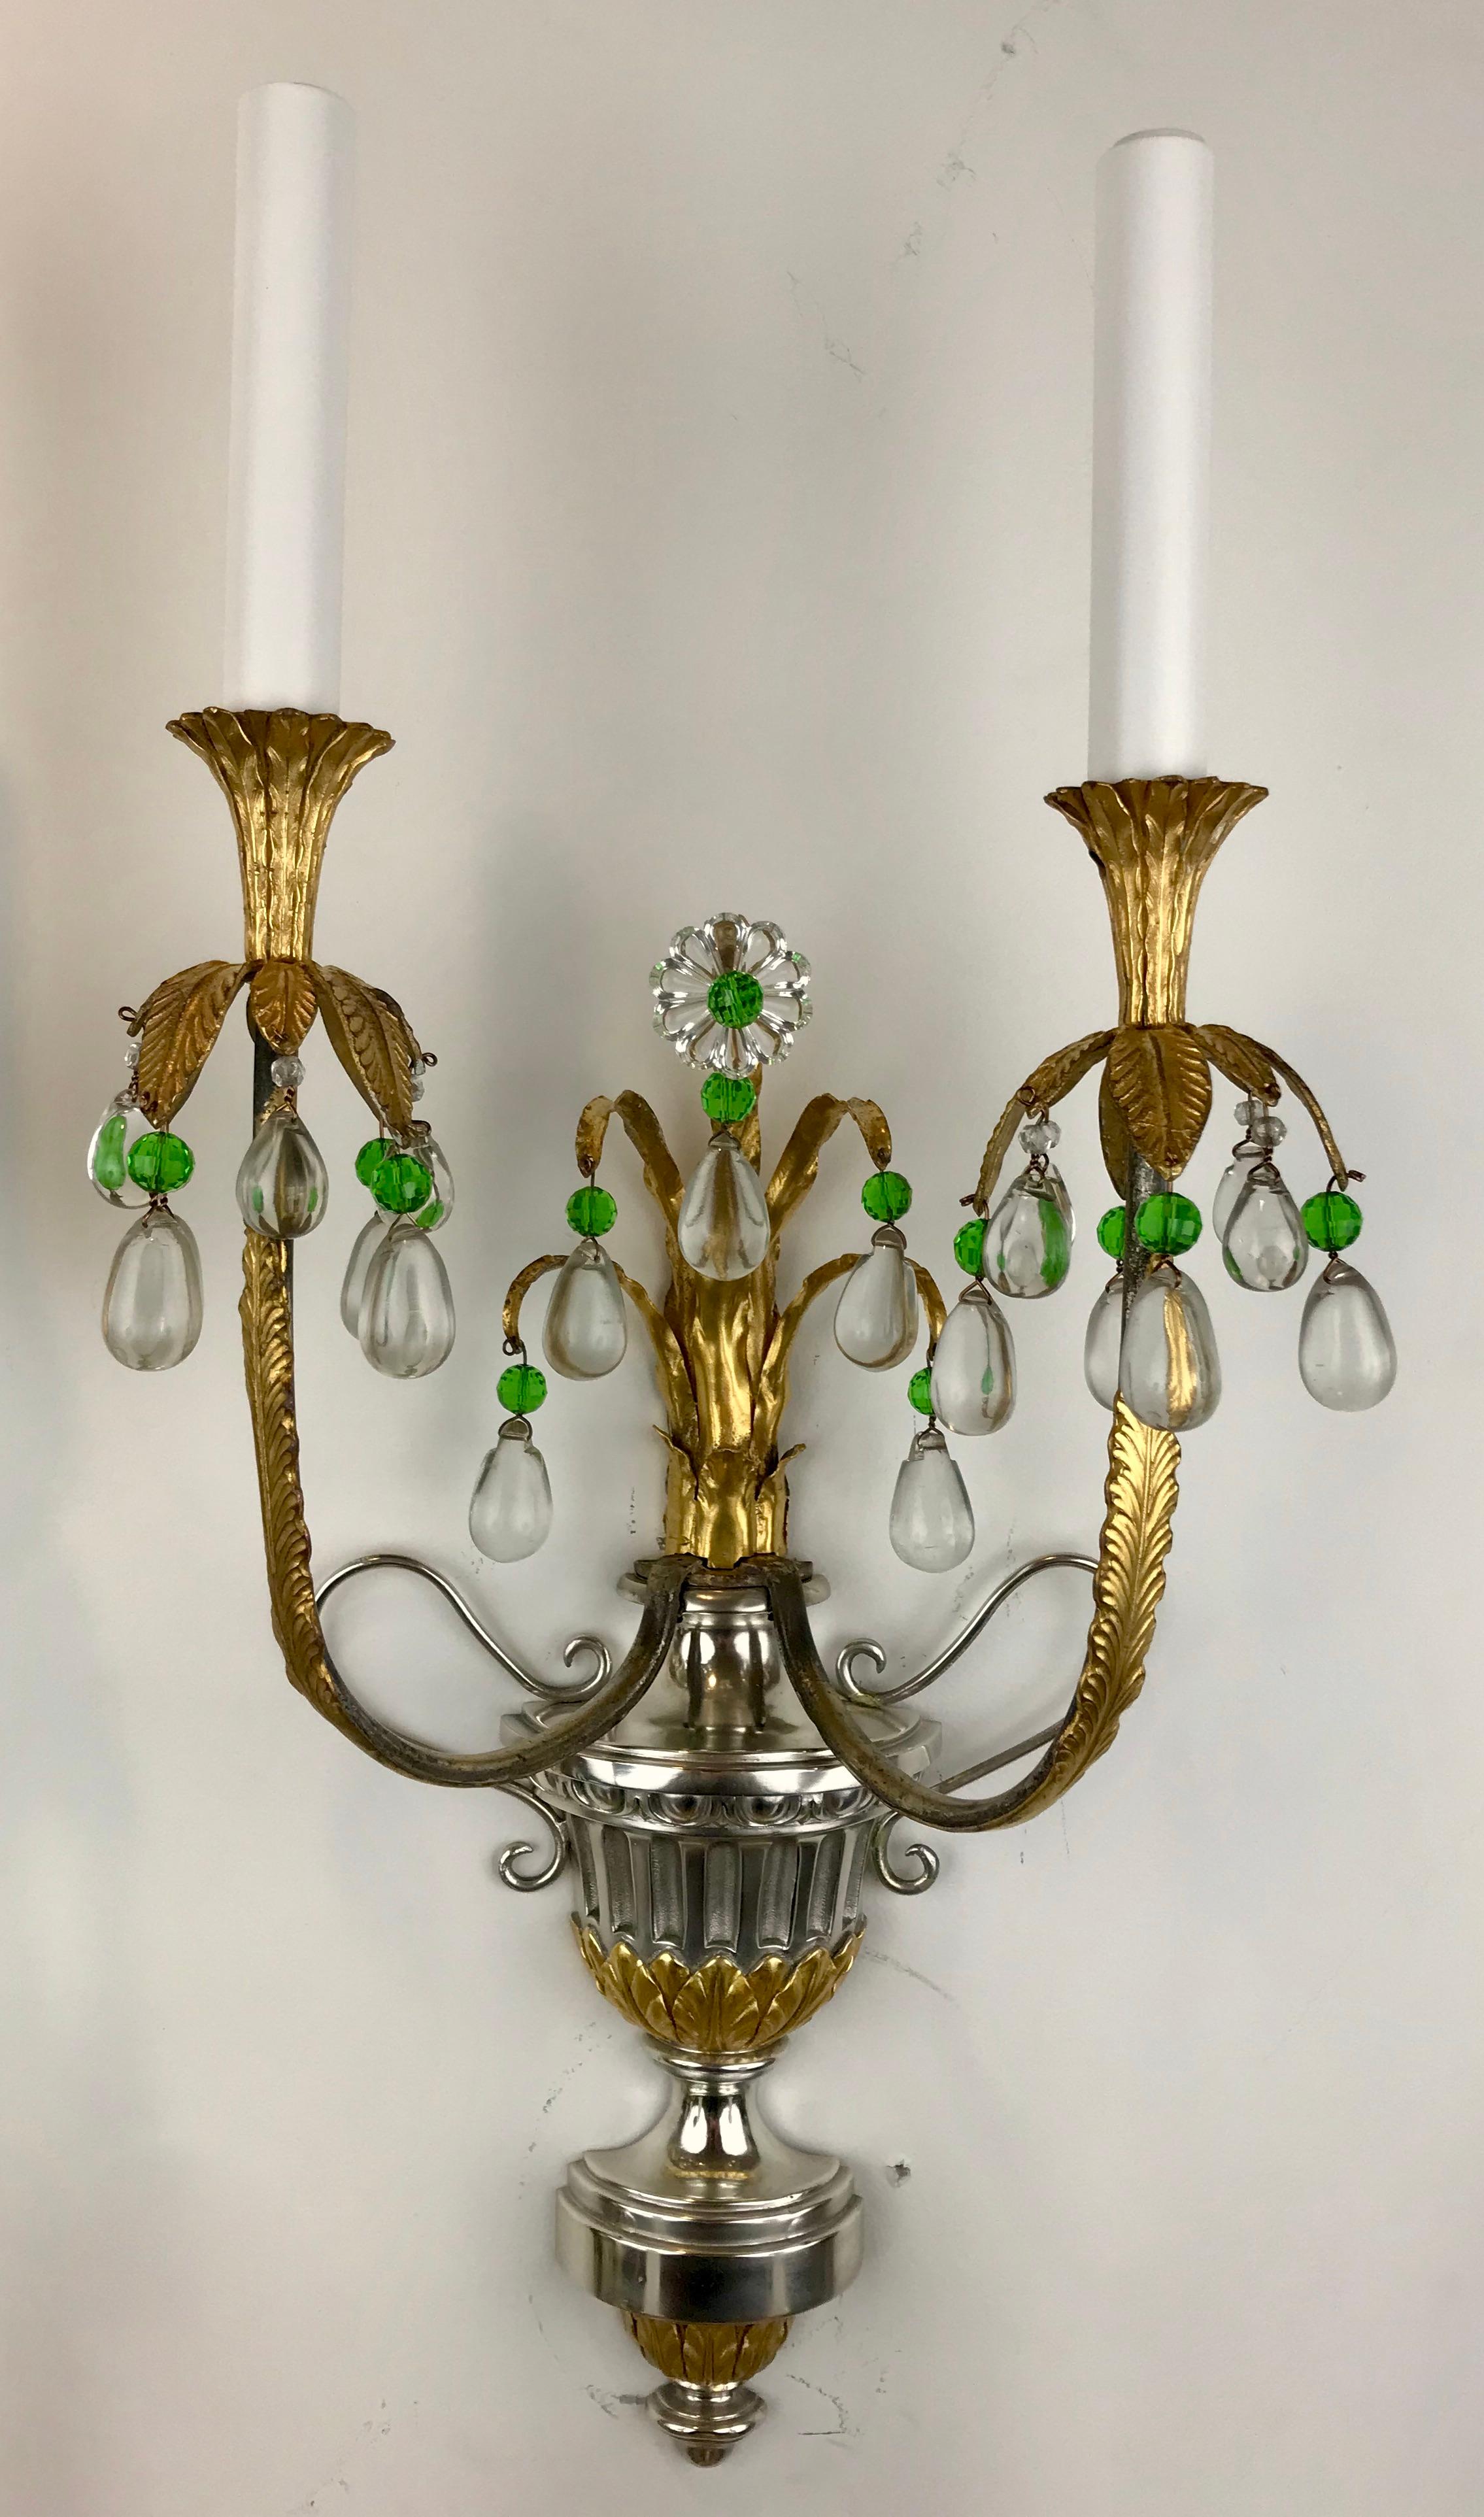  Four Silver and Gilt Bronze Sconces with Green Crystal Accents by Caldwell For Sale 9